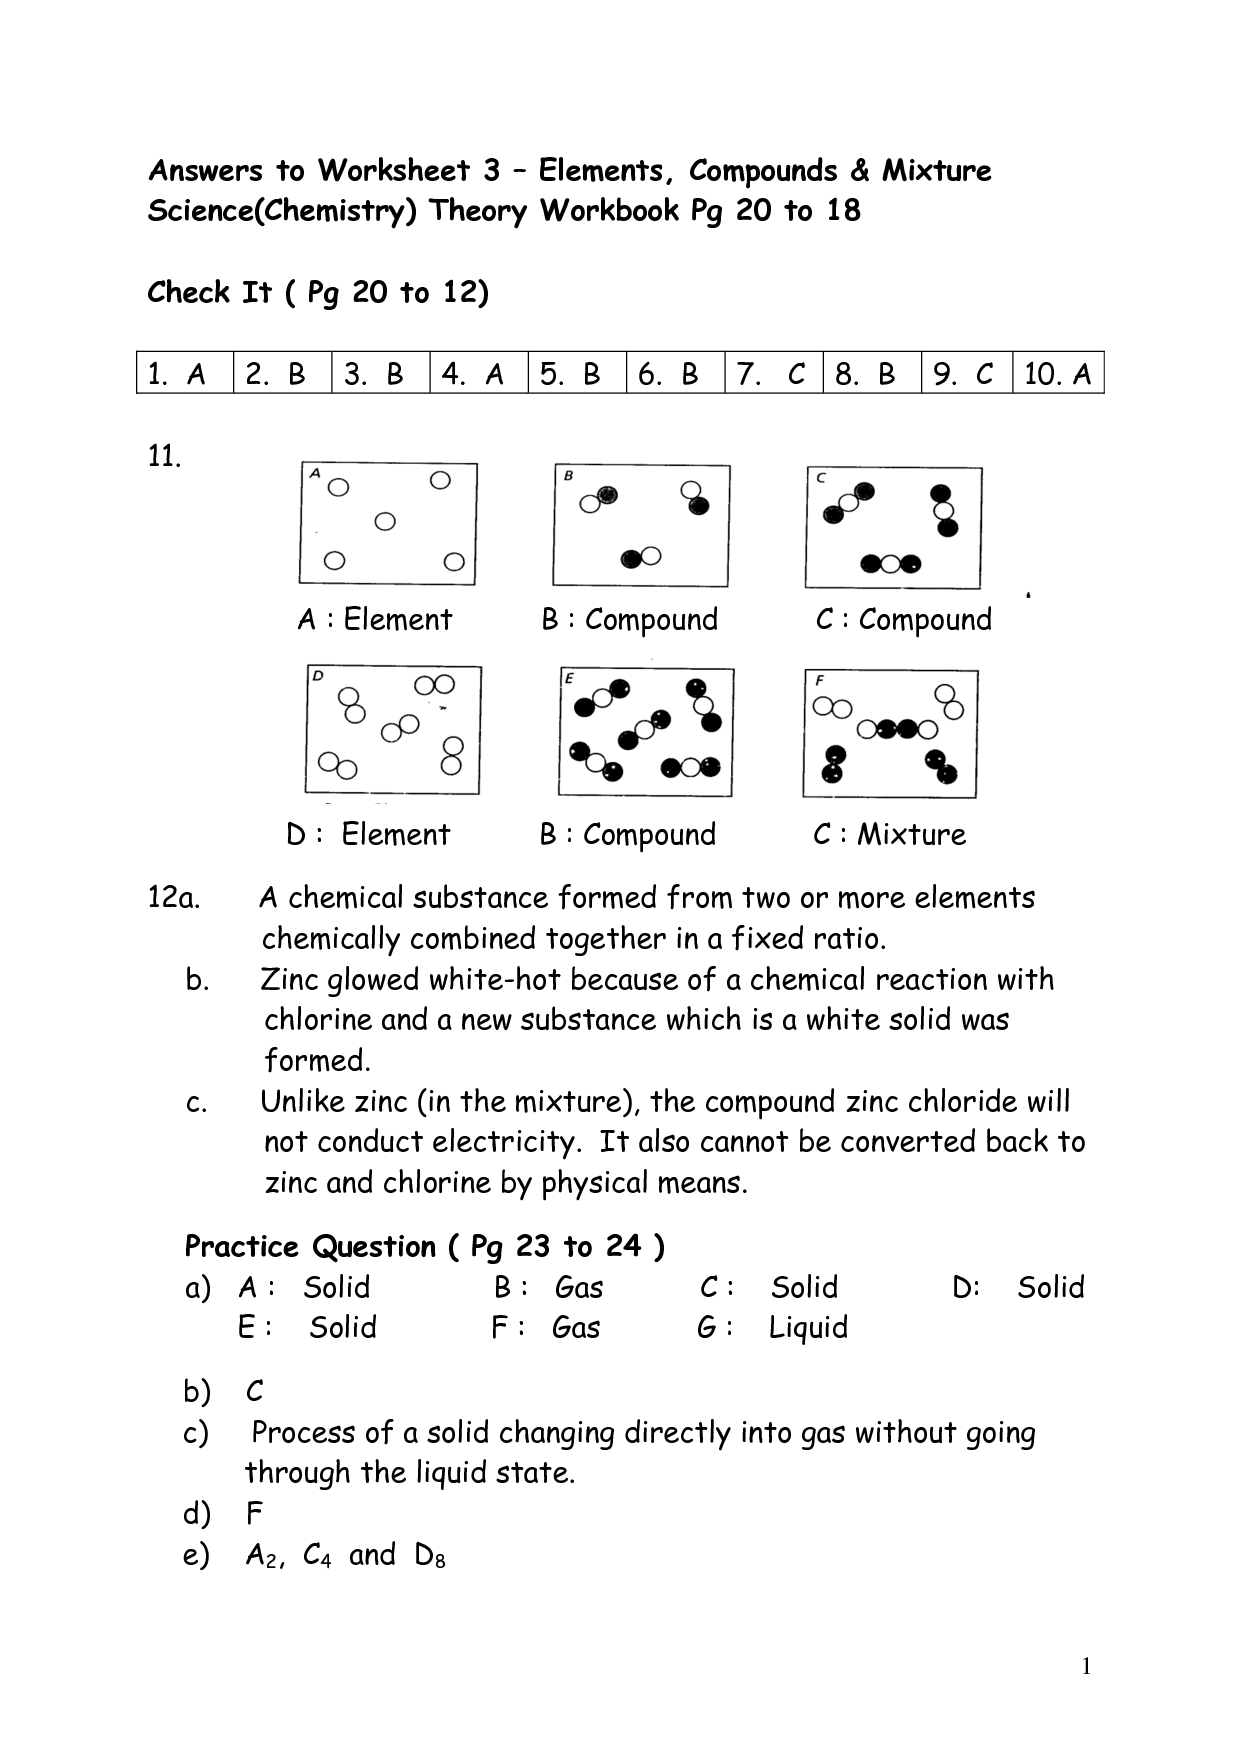 counting-atoms-and-elements-worksheet-answers